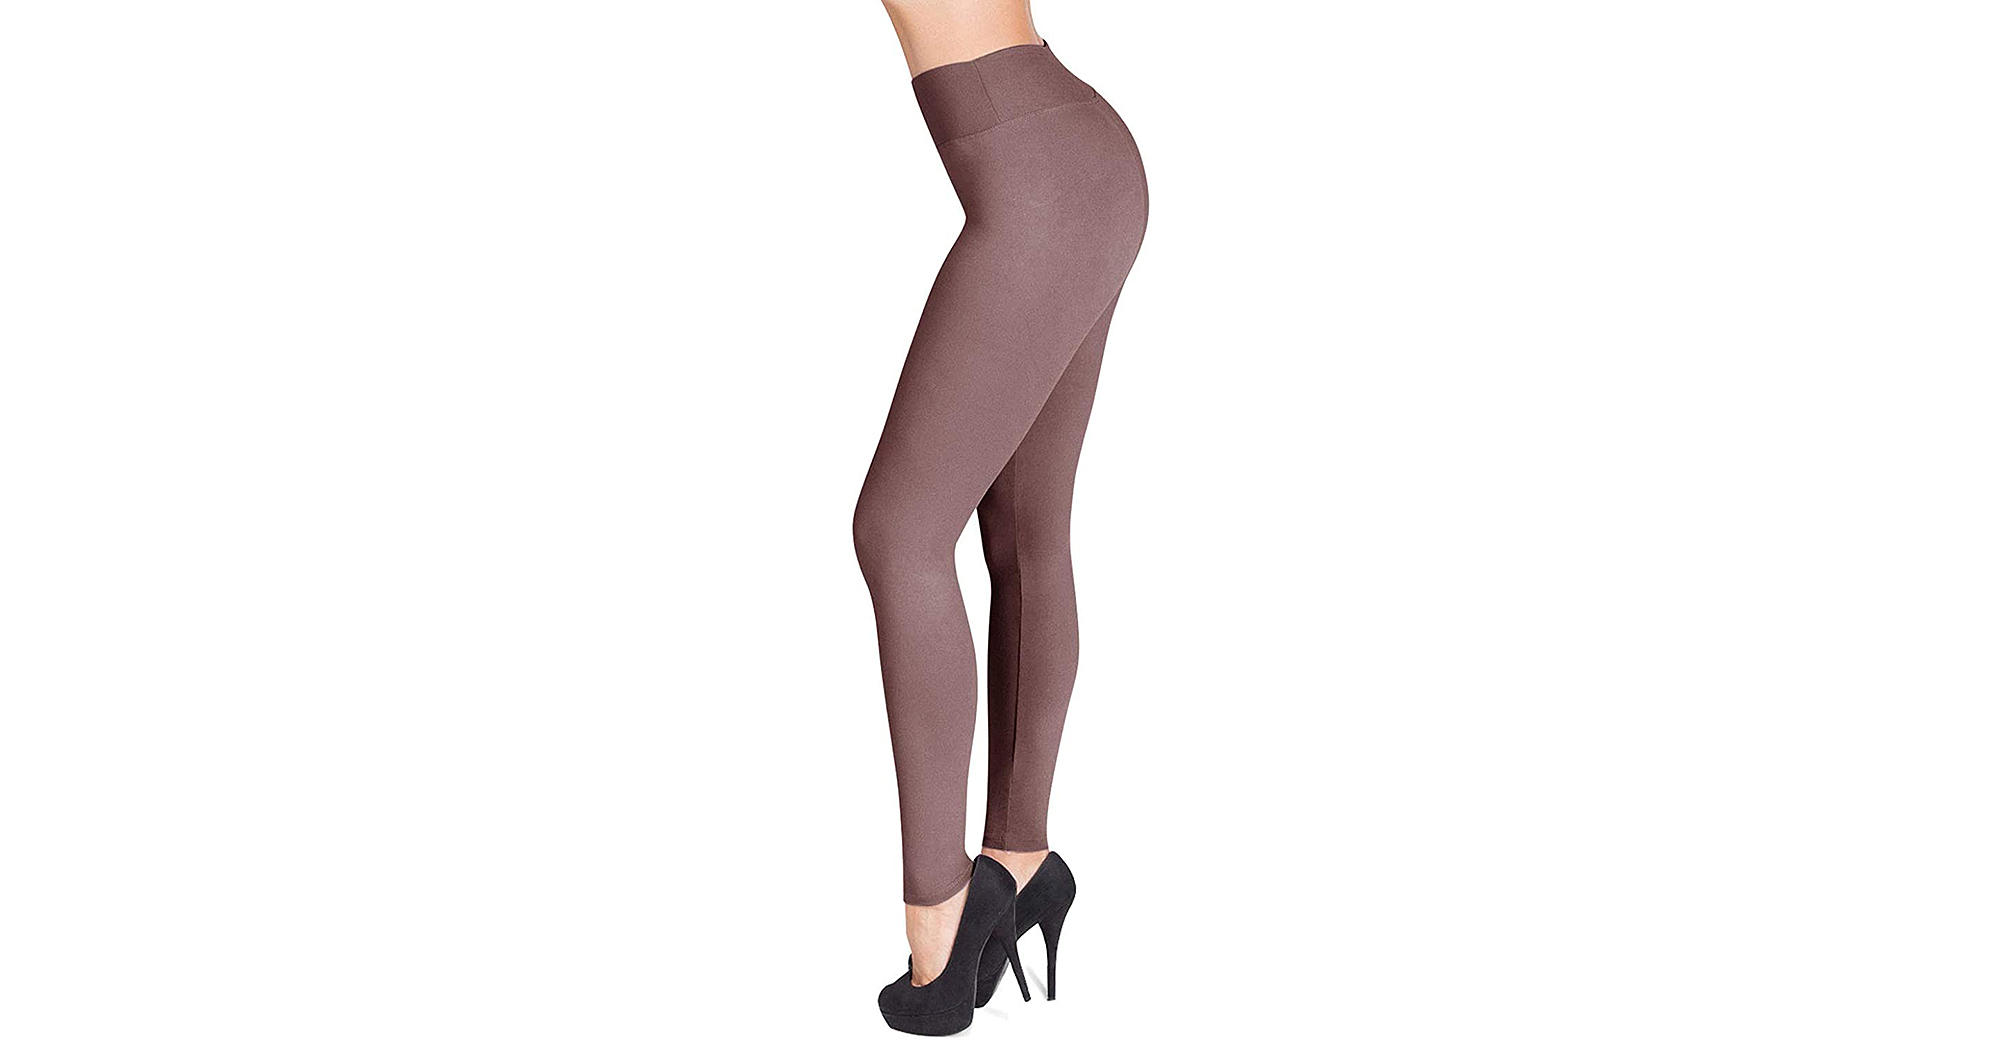 Are Amazon's Best-Selling Leggings a Ripoff? Our Review | What to Pack